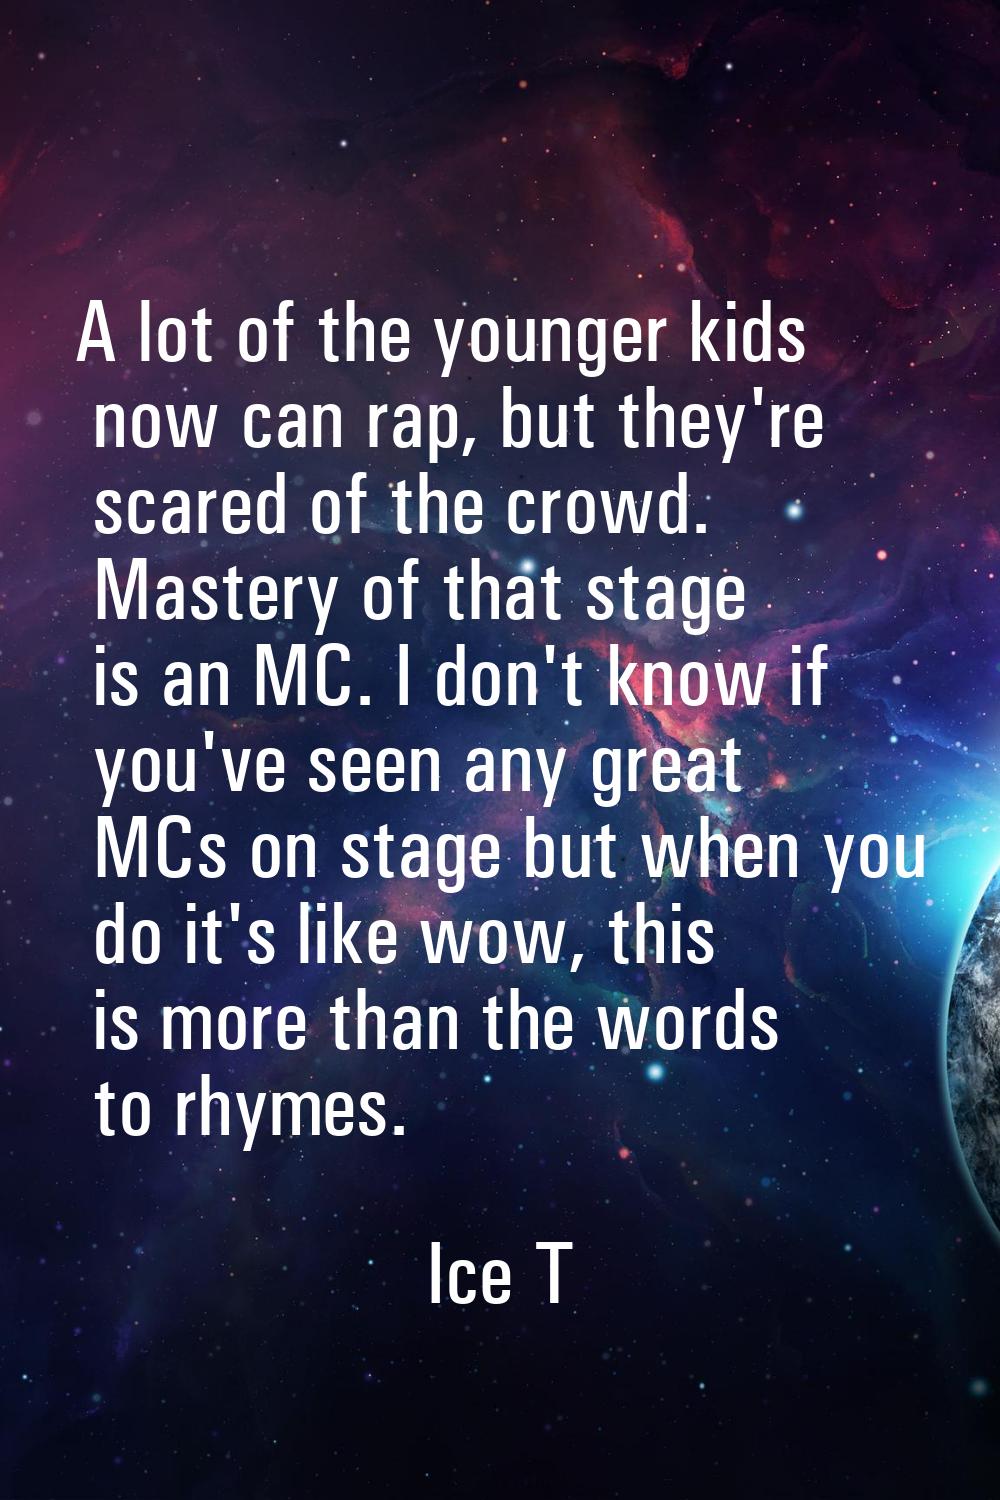 A lot of the younger kids now can rap, but they're scared of the crowd. Mastery of that stage is an